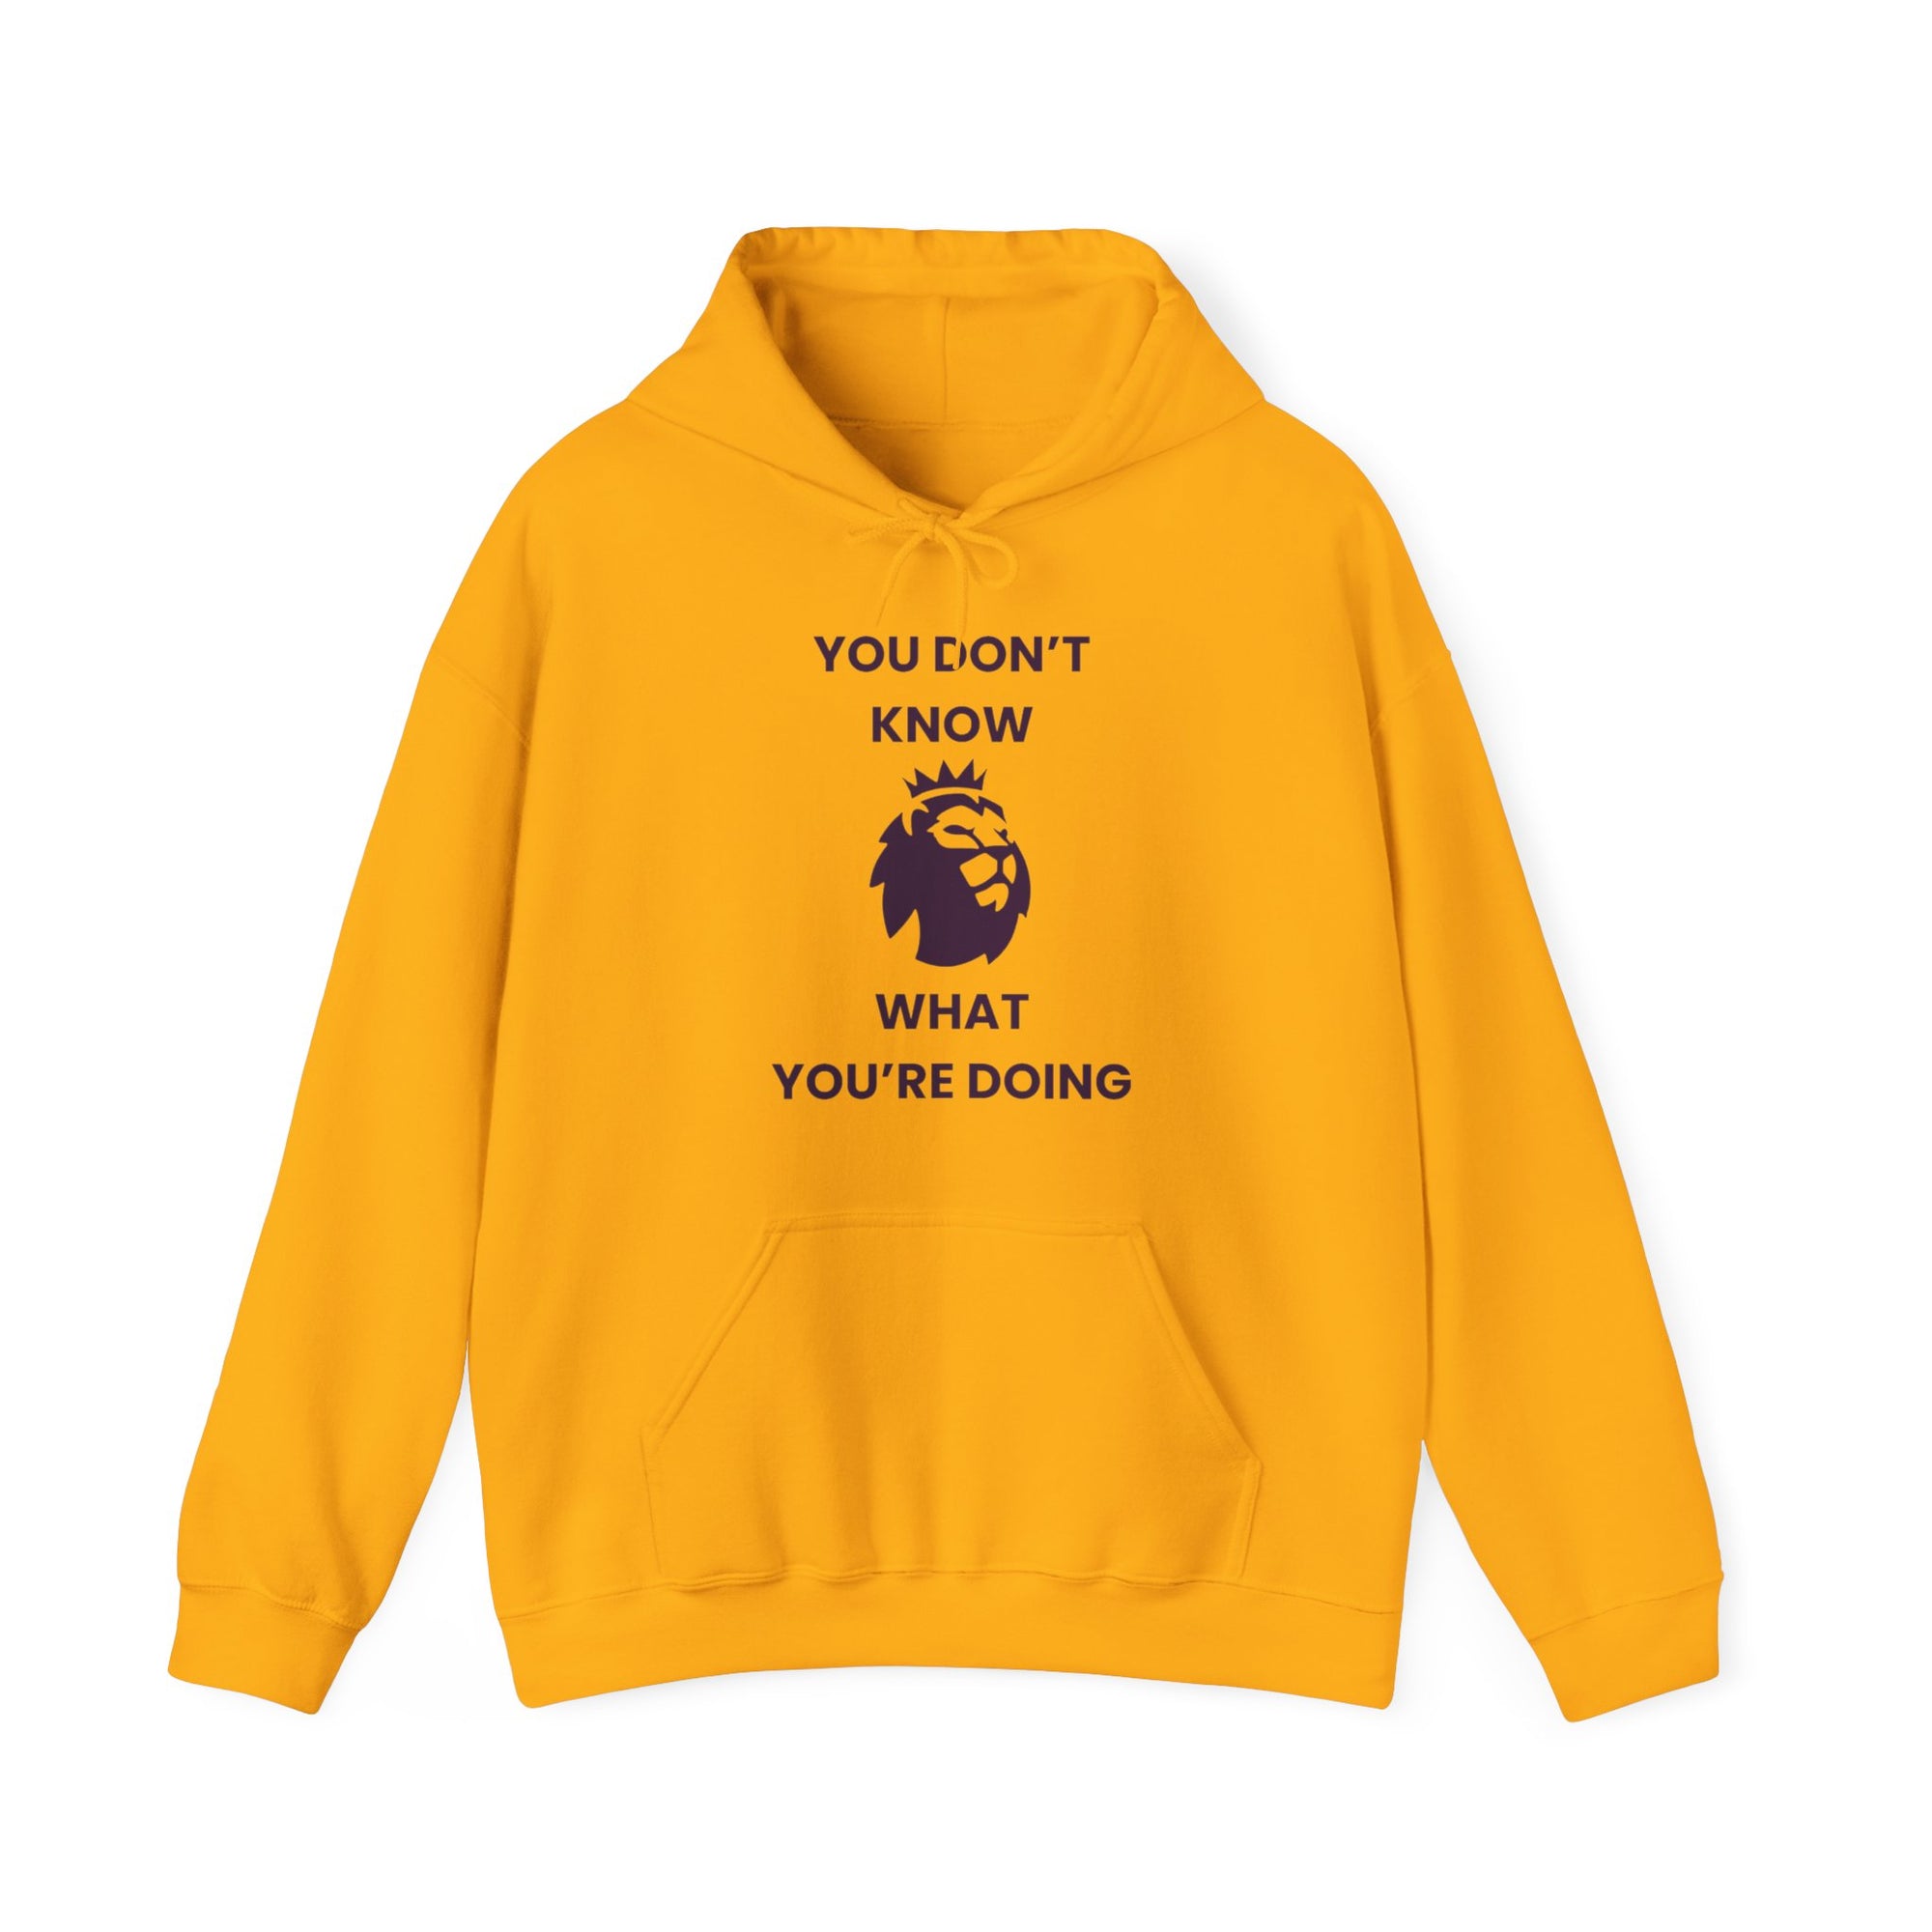 you don't know what you're doing premier league hoodie, everton fans yellow everton hoodie, everton hoodie yellow